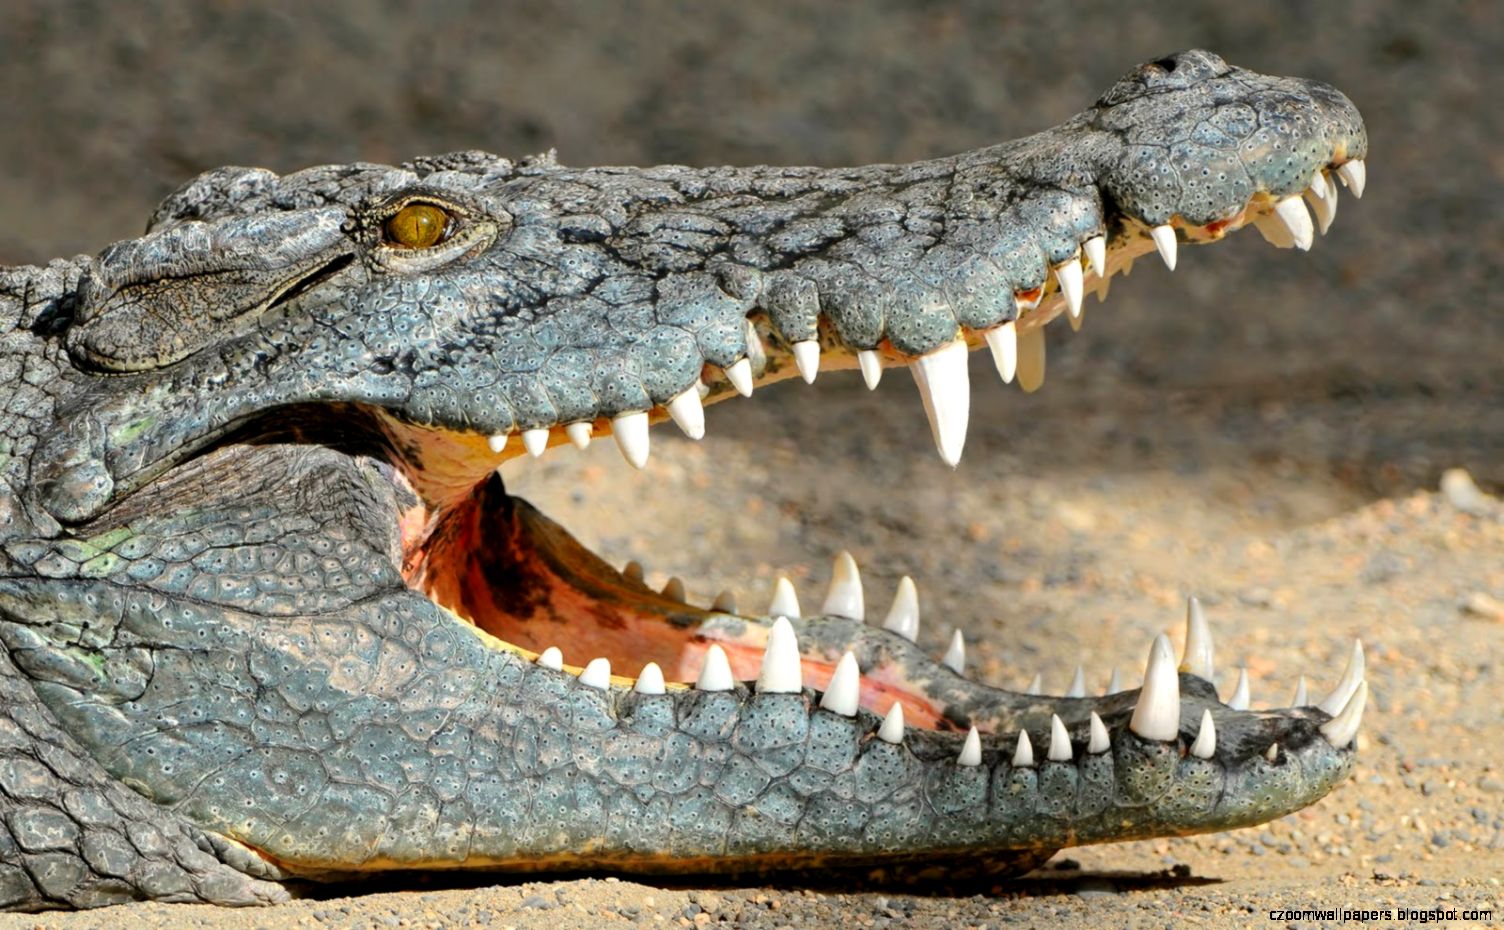 Awesome Hd Wallpapers Of Crocodile Attacks Cattle